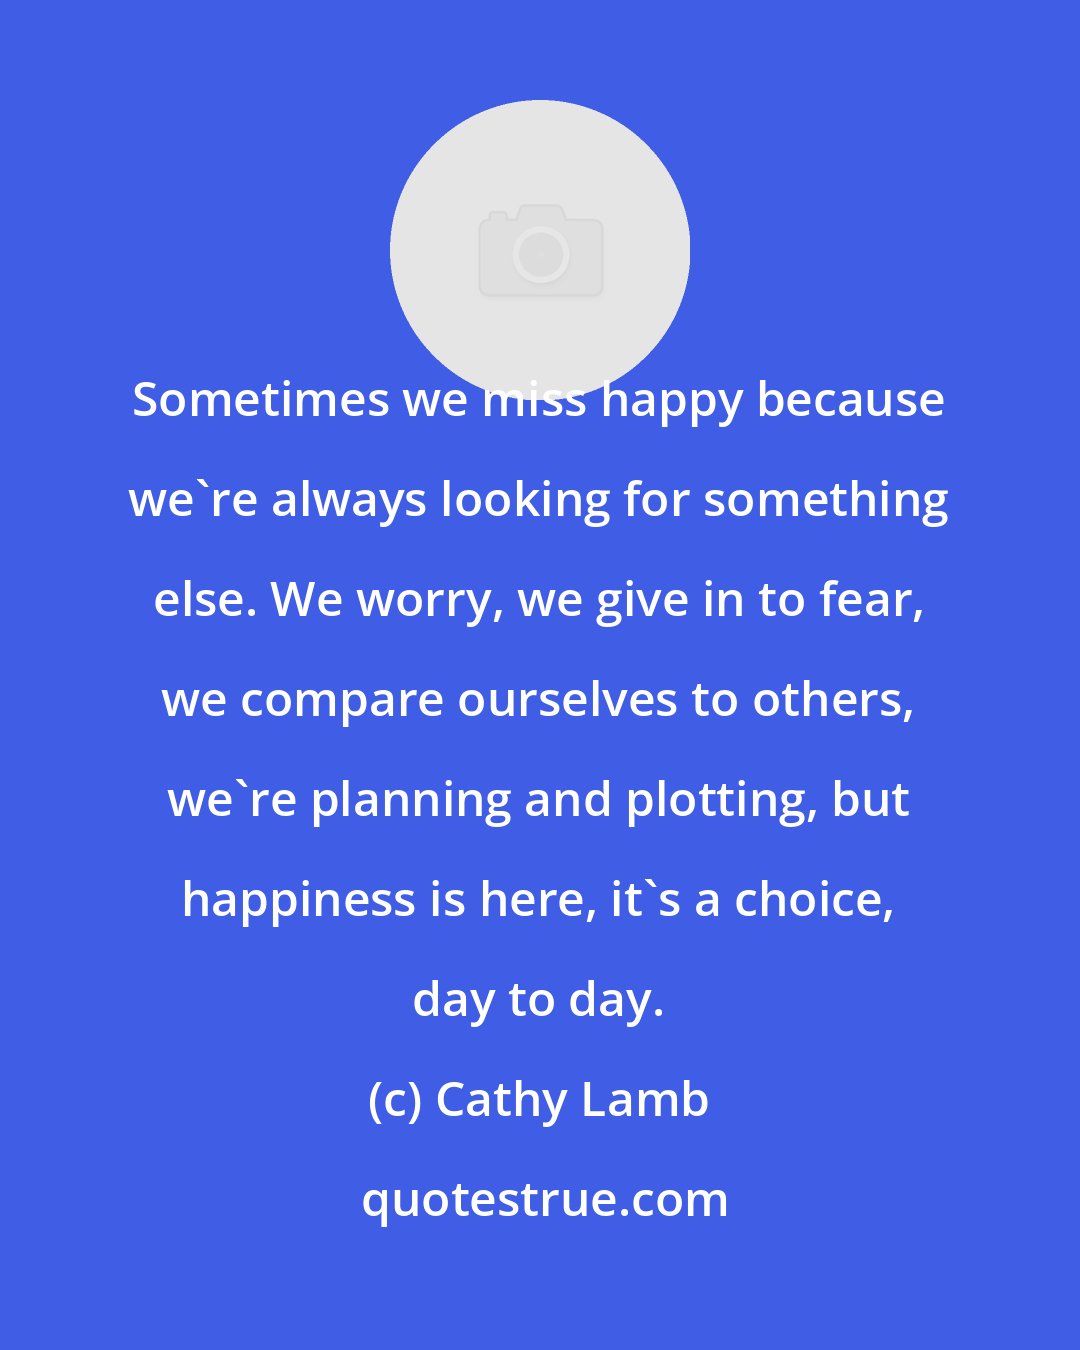 Cathy Lamb: Sometimes we miss happy because we're always looking for something else. We worry, we give in to fear, we compare ourselves to others, we're planning and plotting, but happiness is here, it's a choice, day to day.